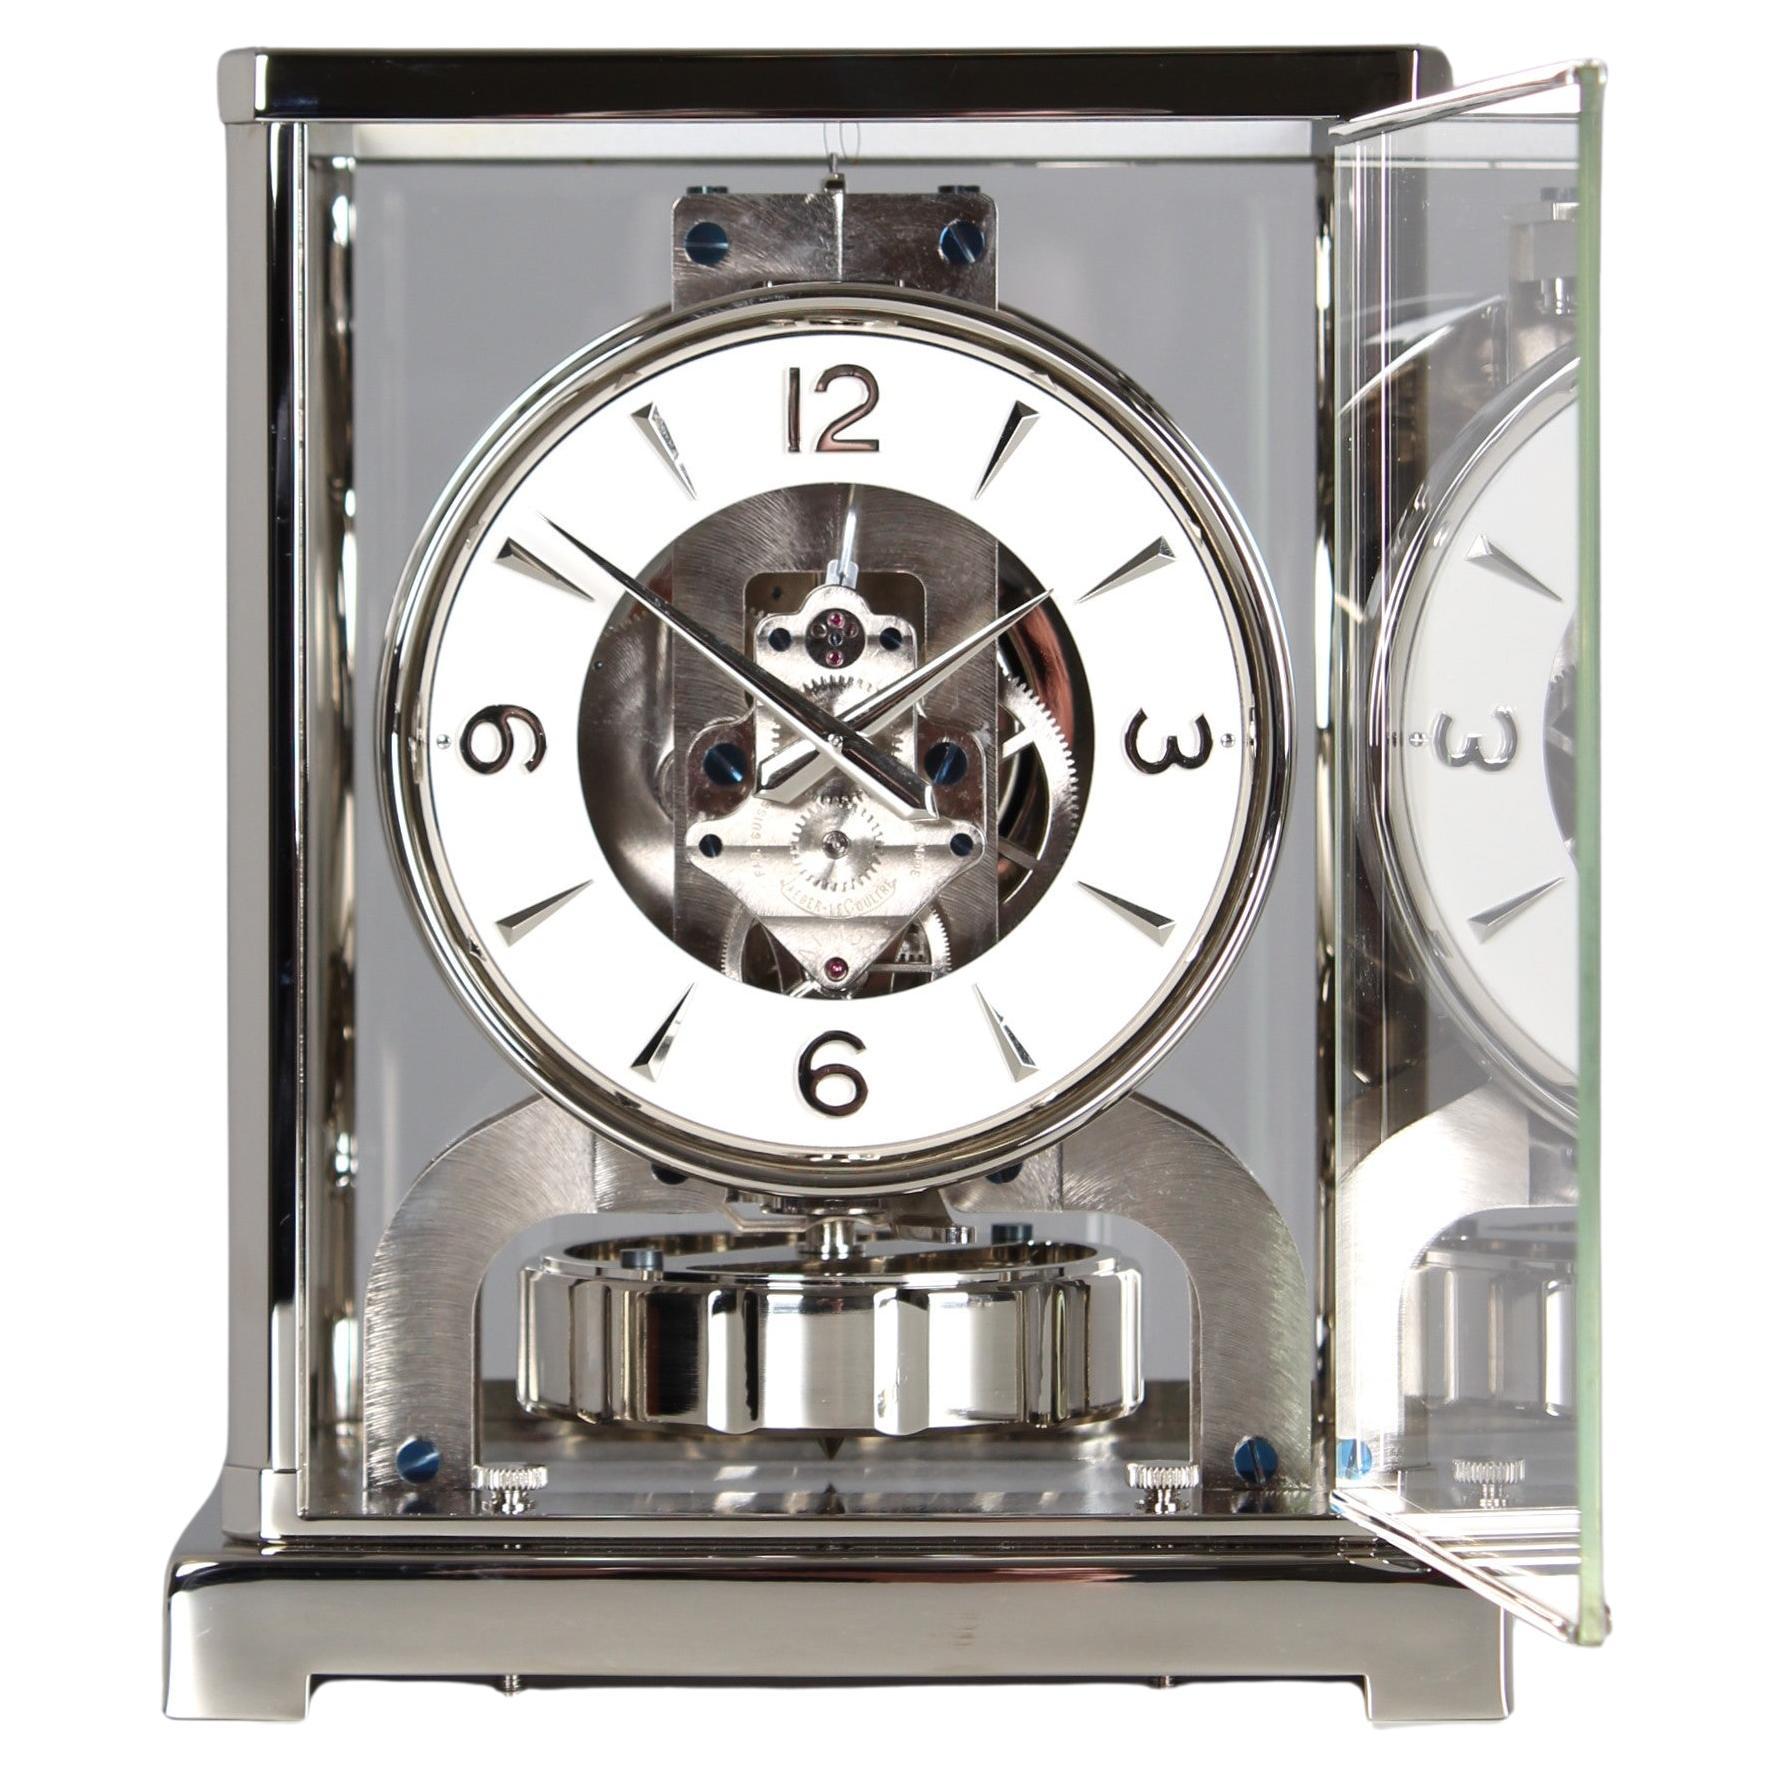 How does a Jaeger-LeCoultre Atmos clock work?